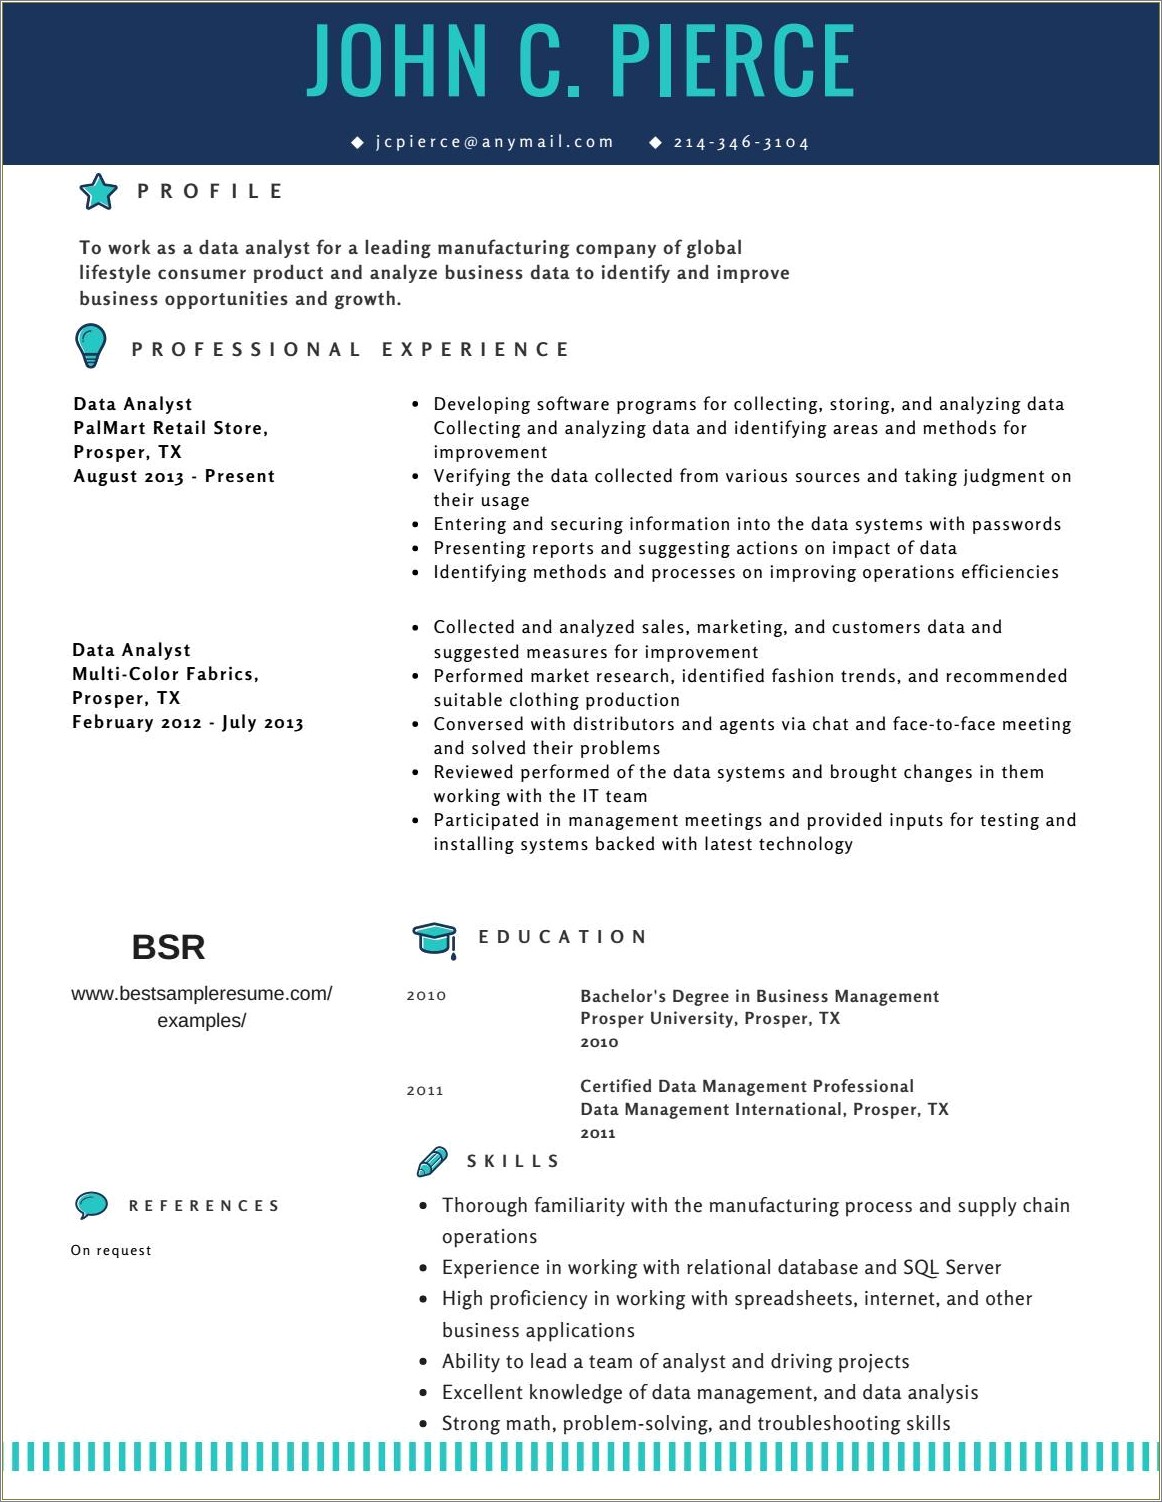 Resume Of Operations Manager Tailoring Industry